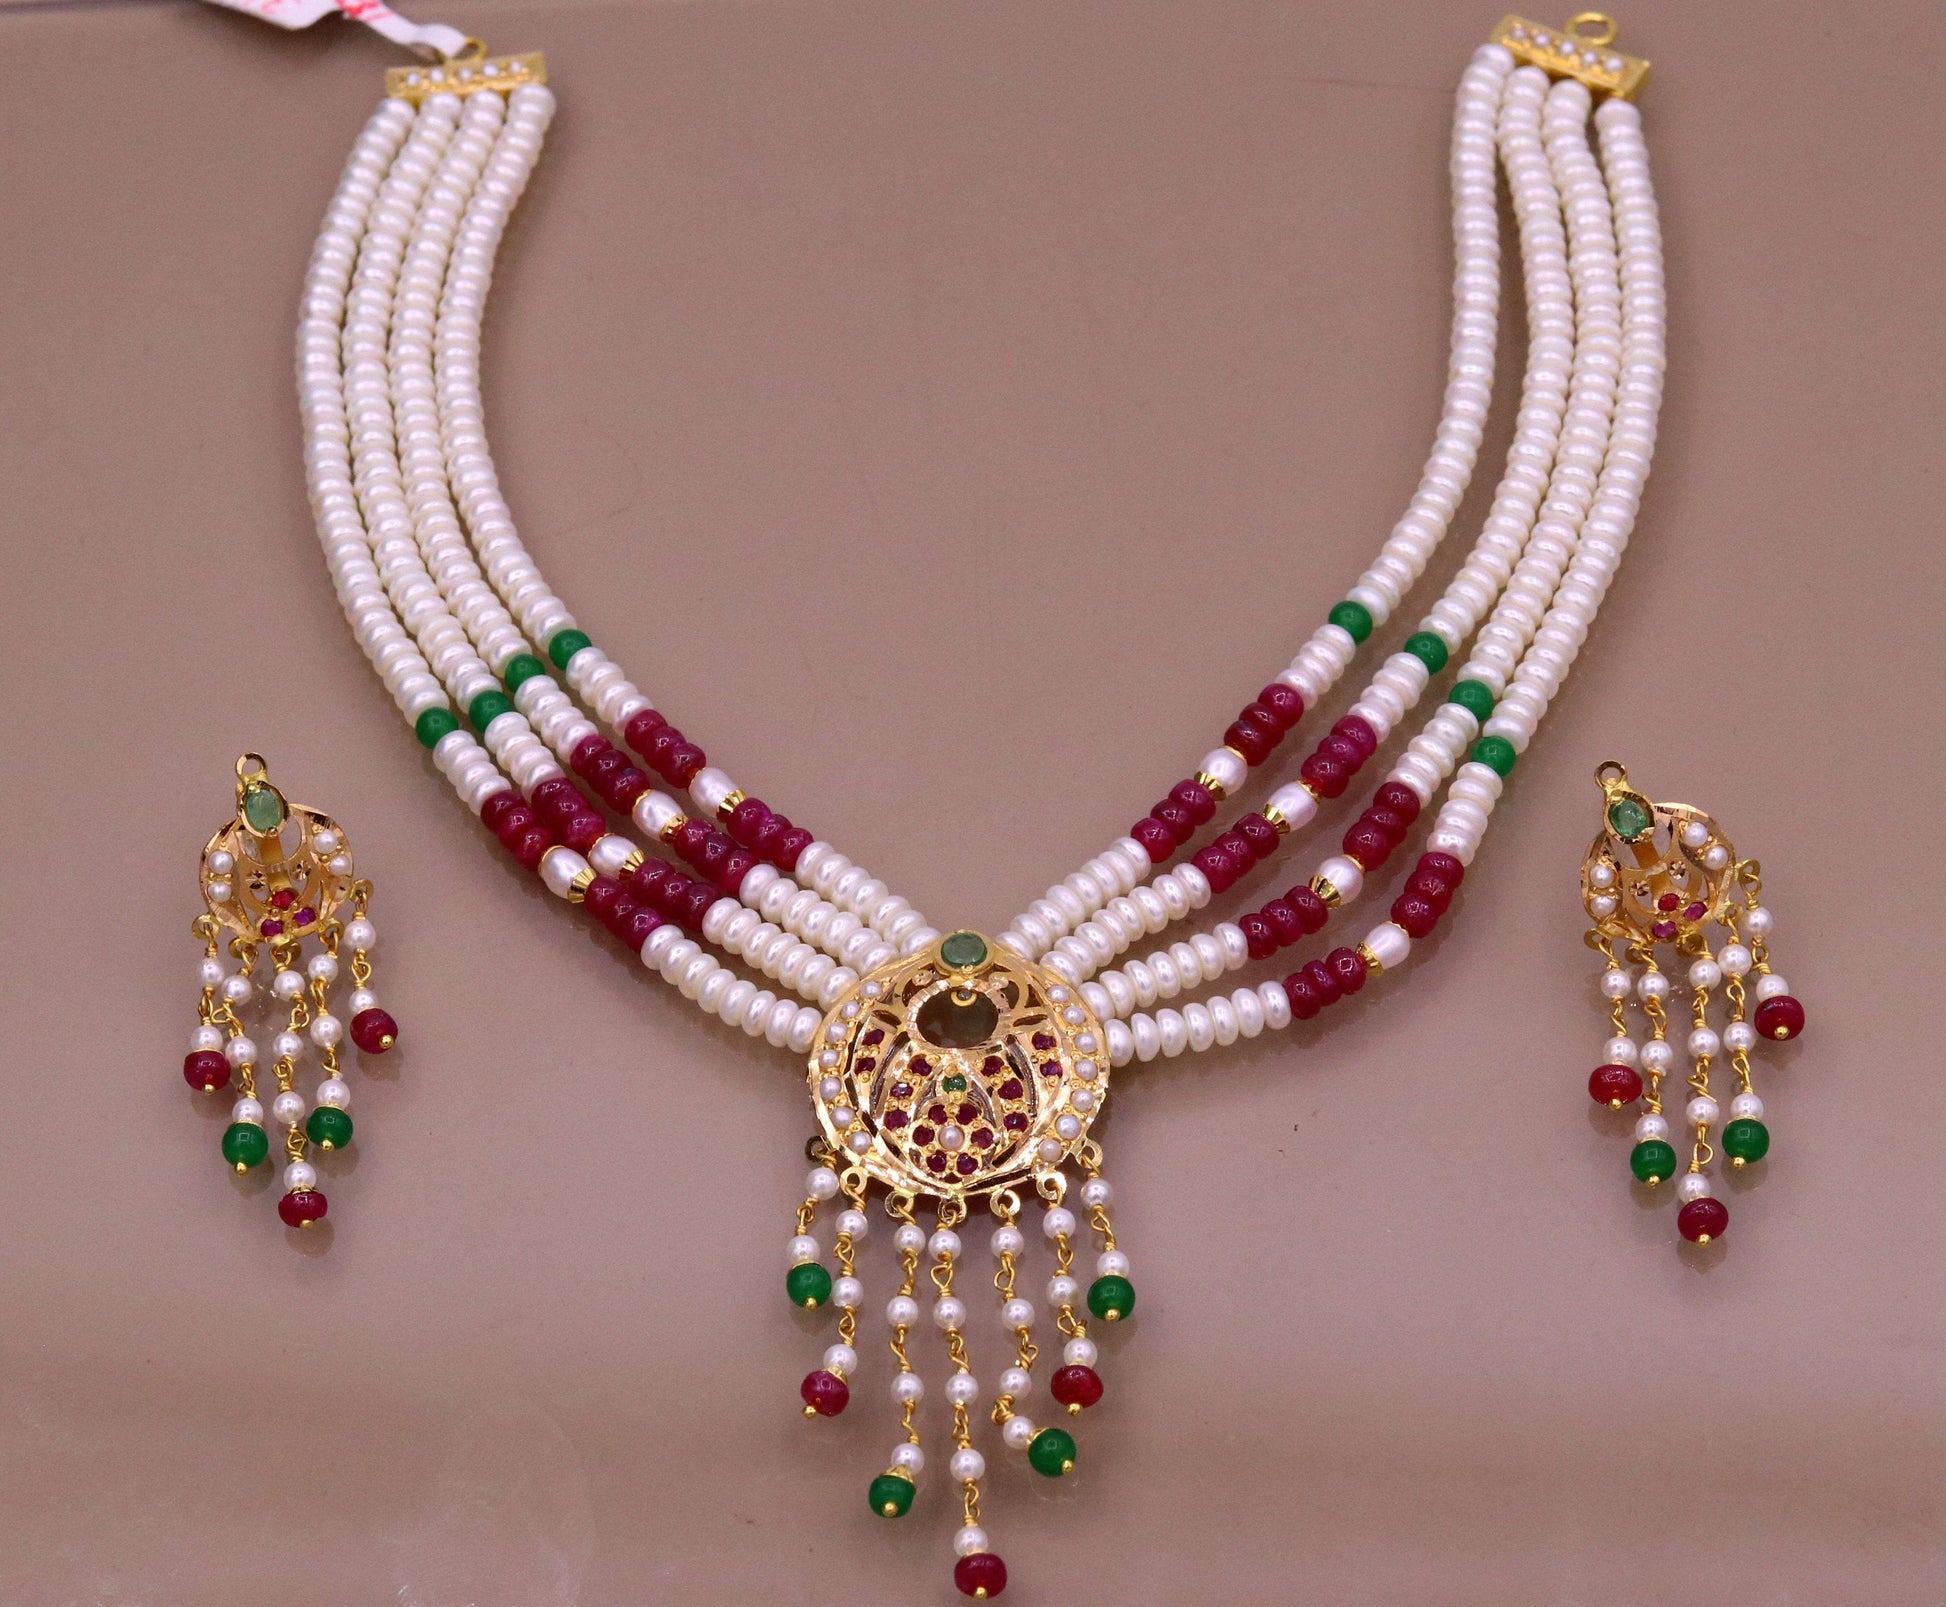 Vintage design handmade 22kt yellow gold fabulous necklace set with amazing hanging color beads, wedding party tribal jewelry india - TRIBAL ORNAMENTS